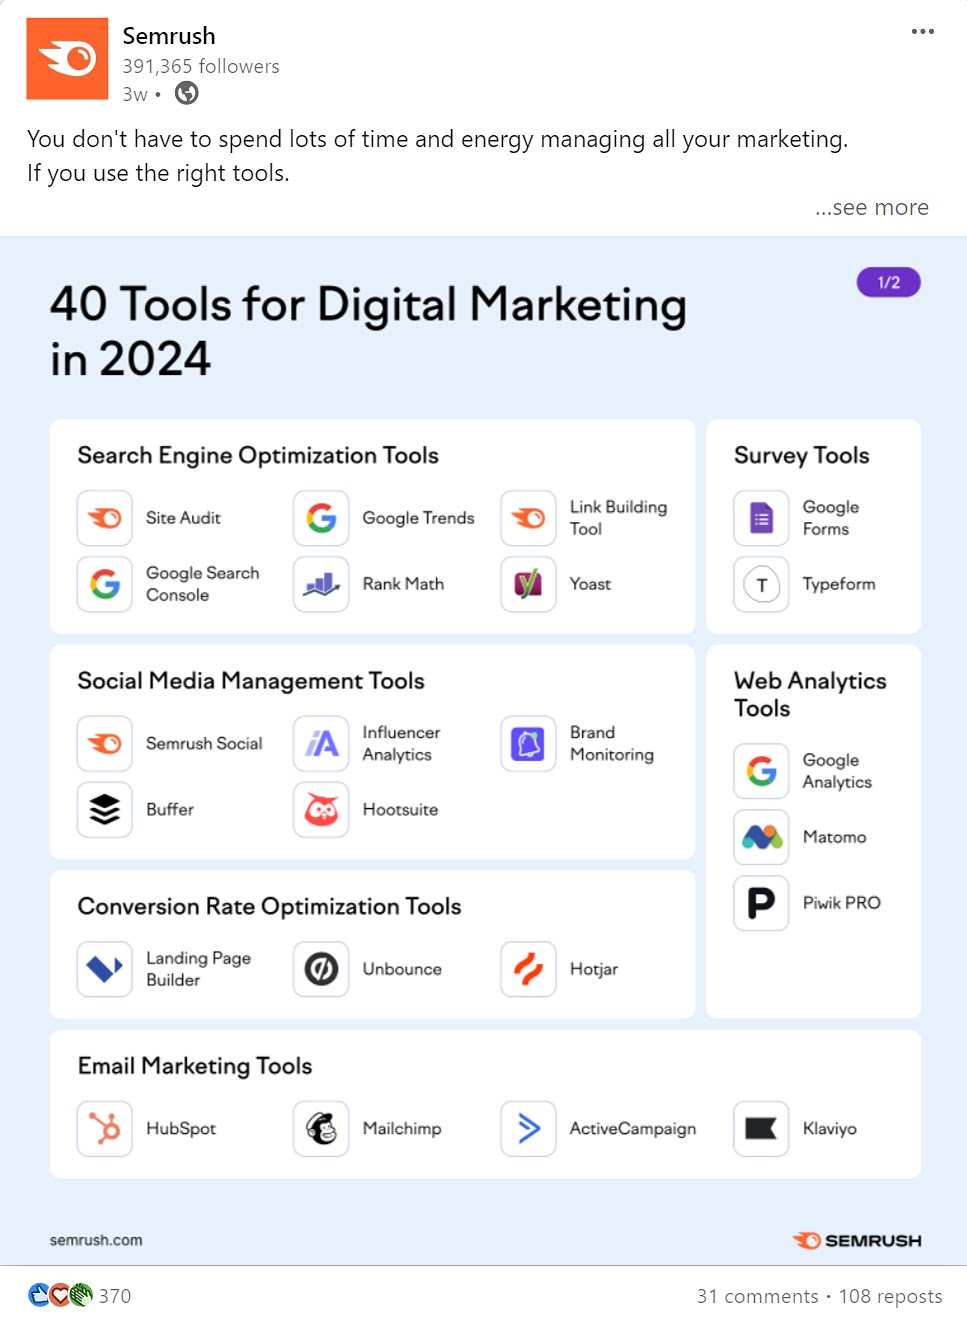 Semrush's station  connected  LinkedIn, sharing 40 tools for integer  marketers